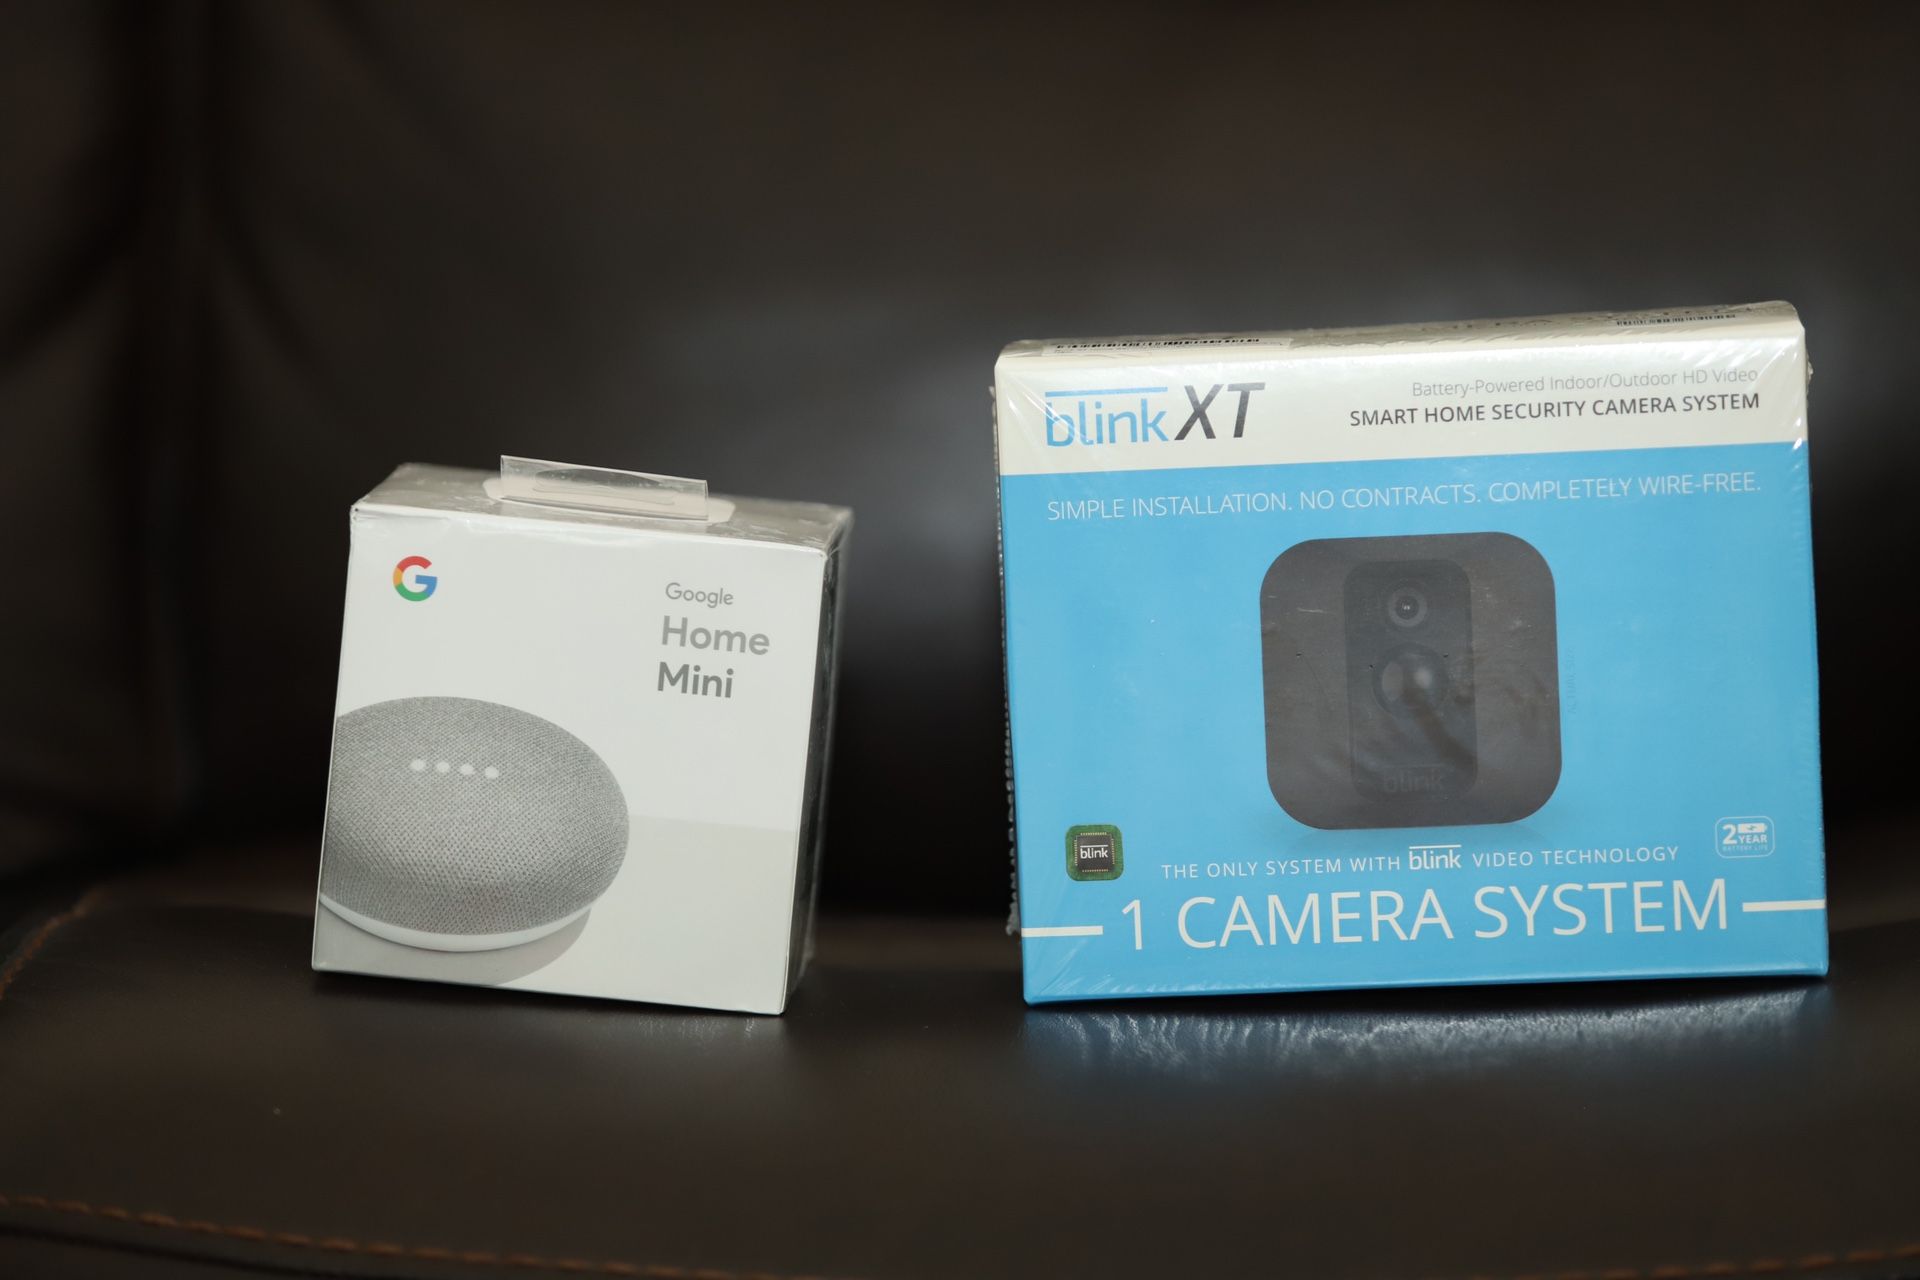 Blink XT brand new sealed with Google home